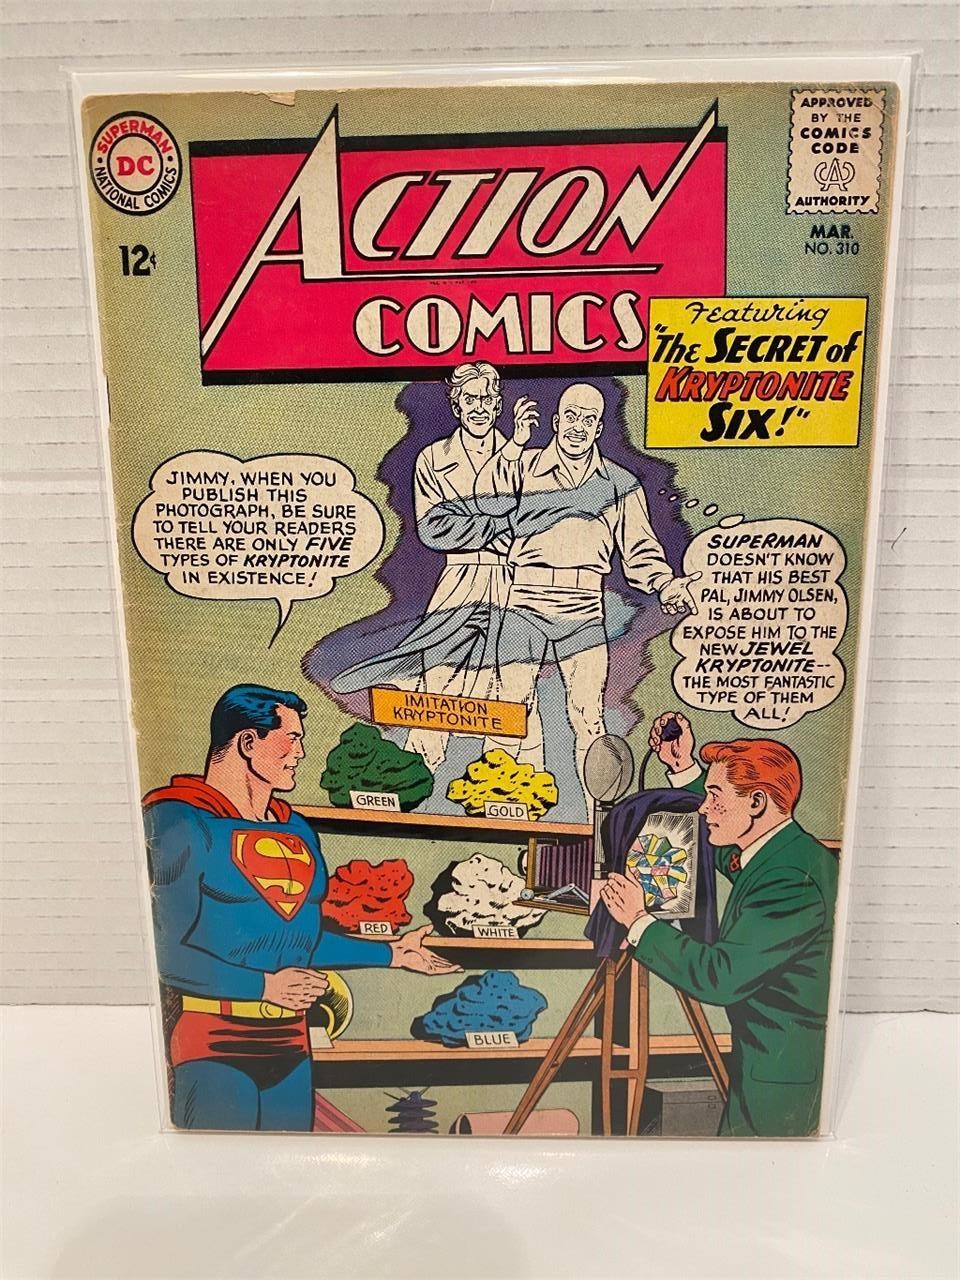 Comic Book Collection Auction